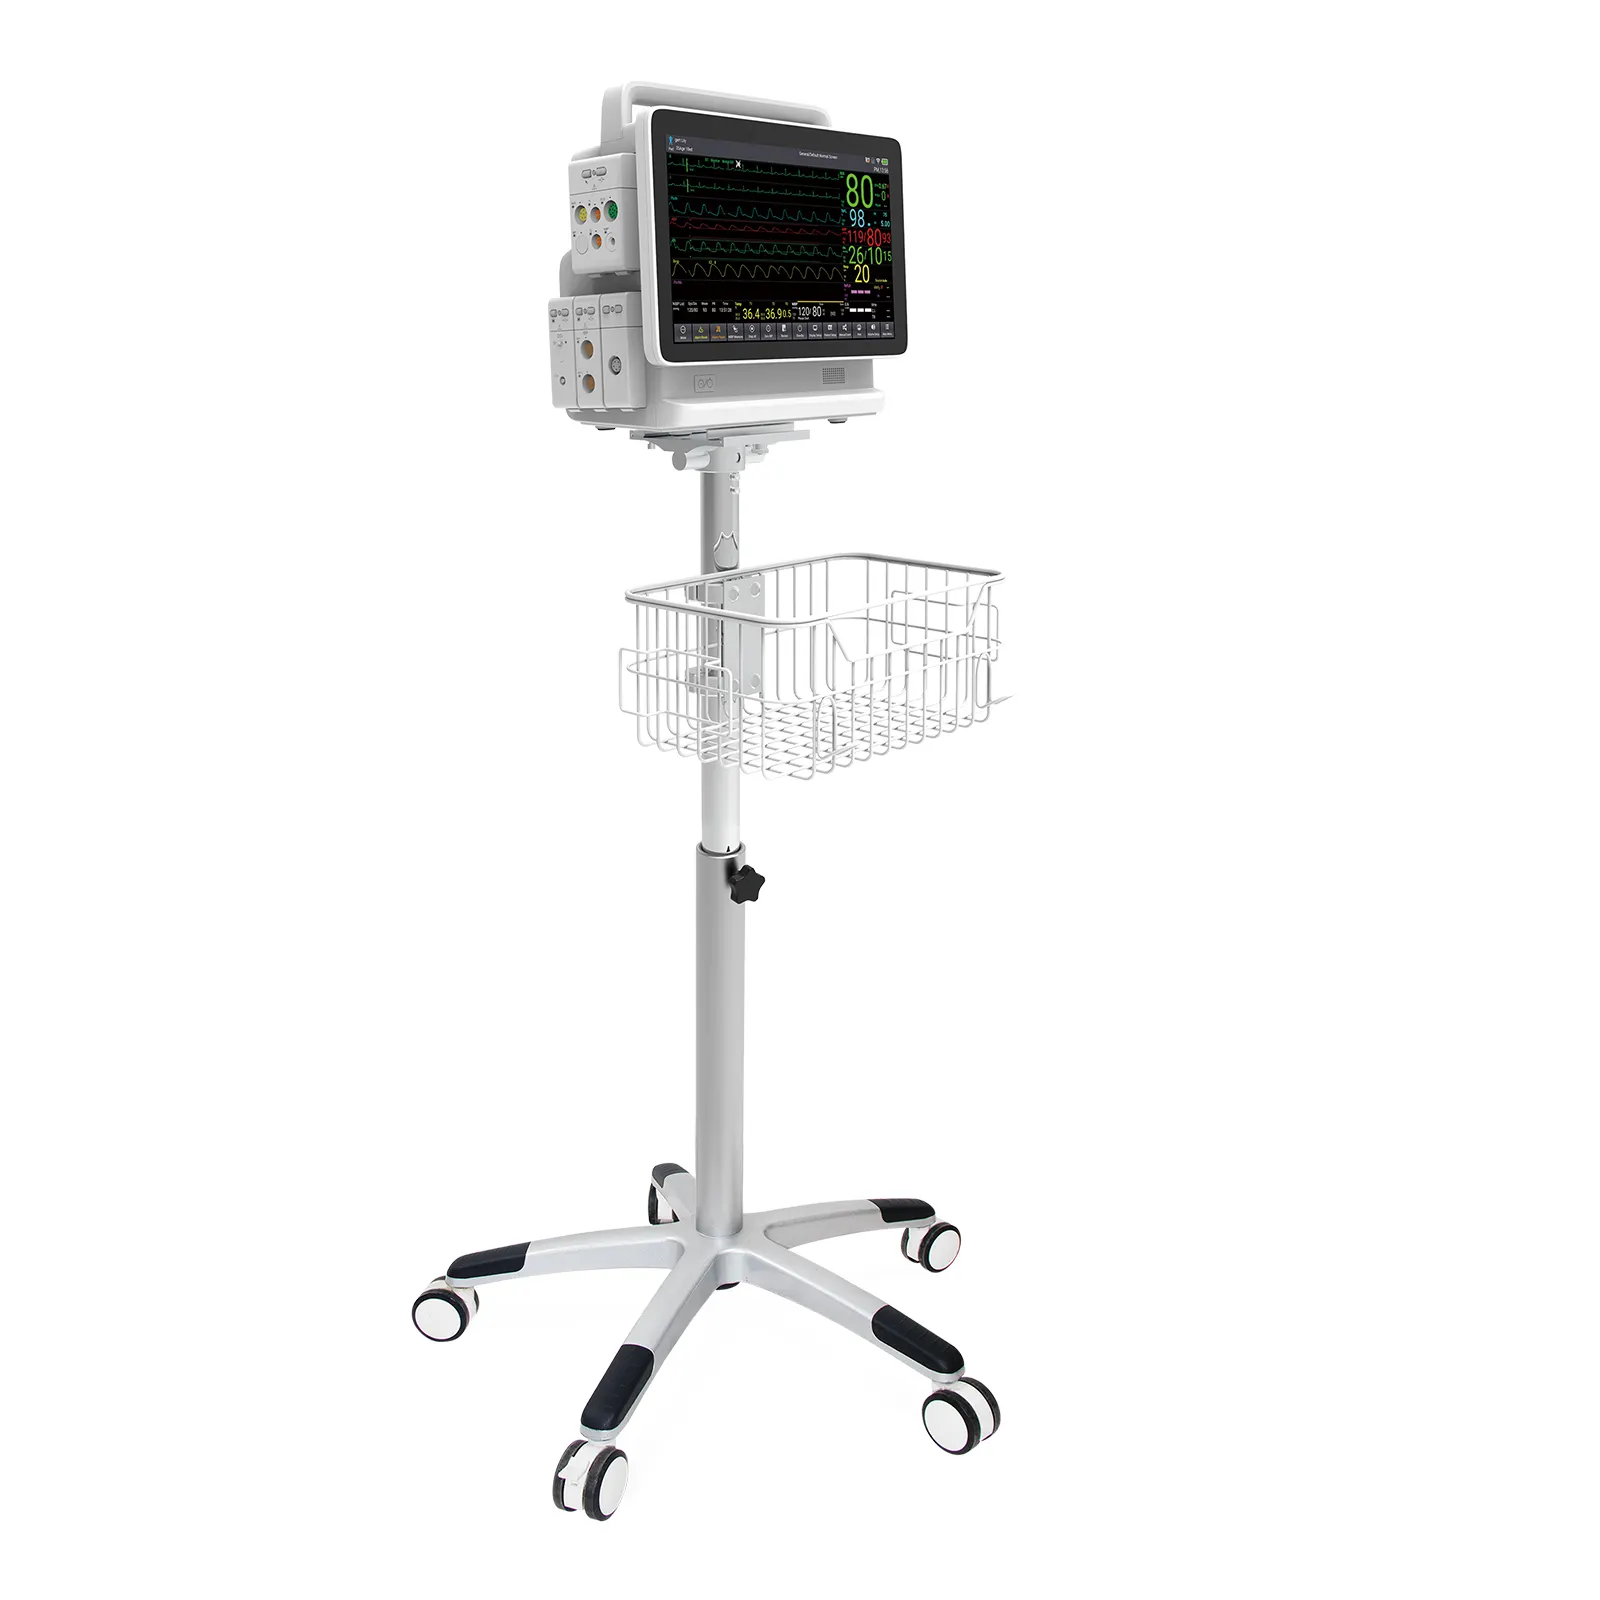 CONTEC medical moving trolley patient monitor Bracket Stand cart hospital use